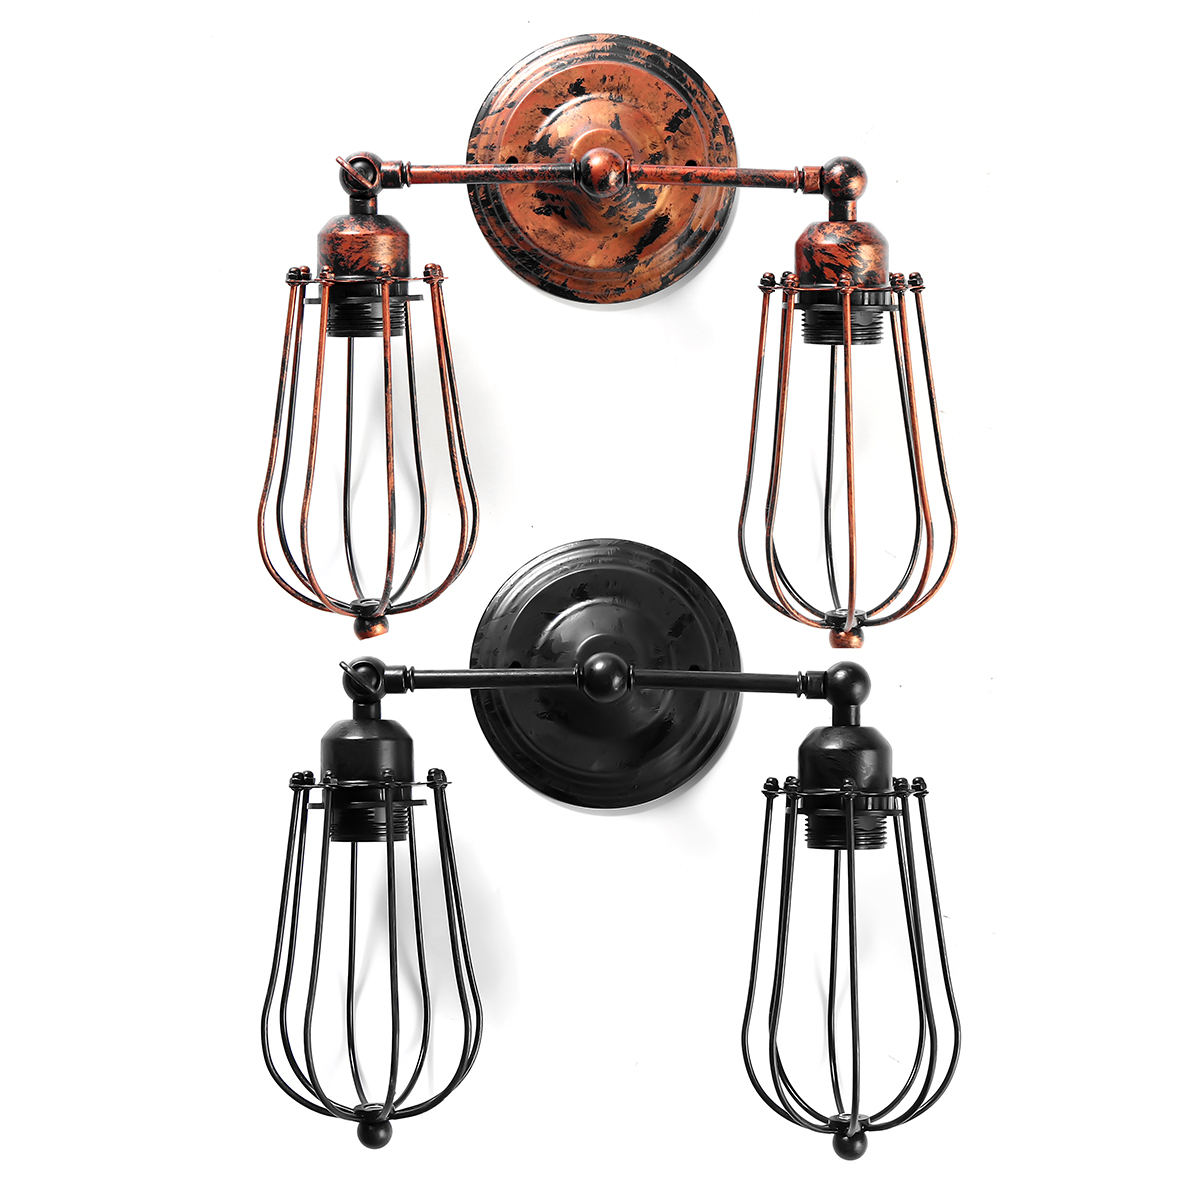 Vintage-Industrial-Wall-Light-Mounted-Sconce-Iron-Retro-Lamp-Fixture-Room-Decor-1682933-7